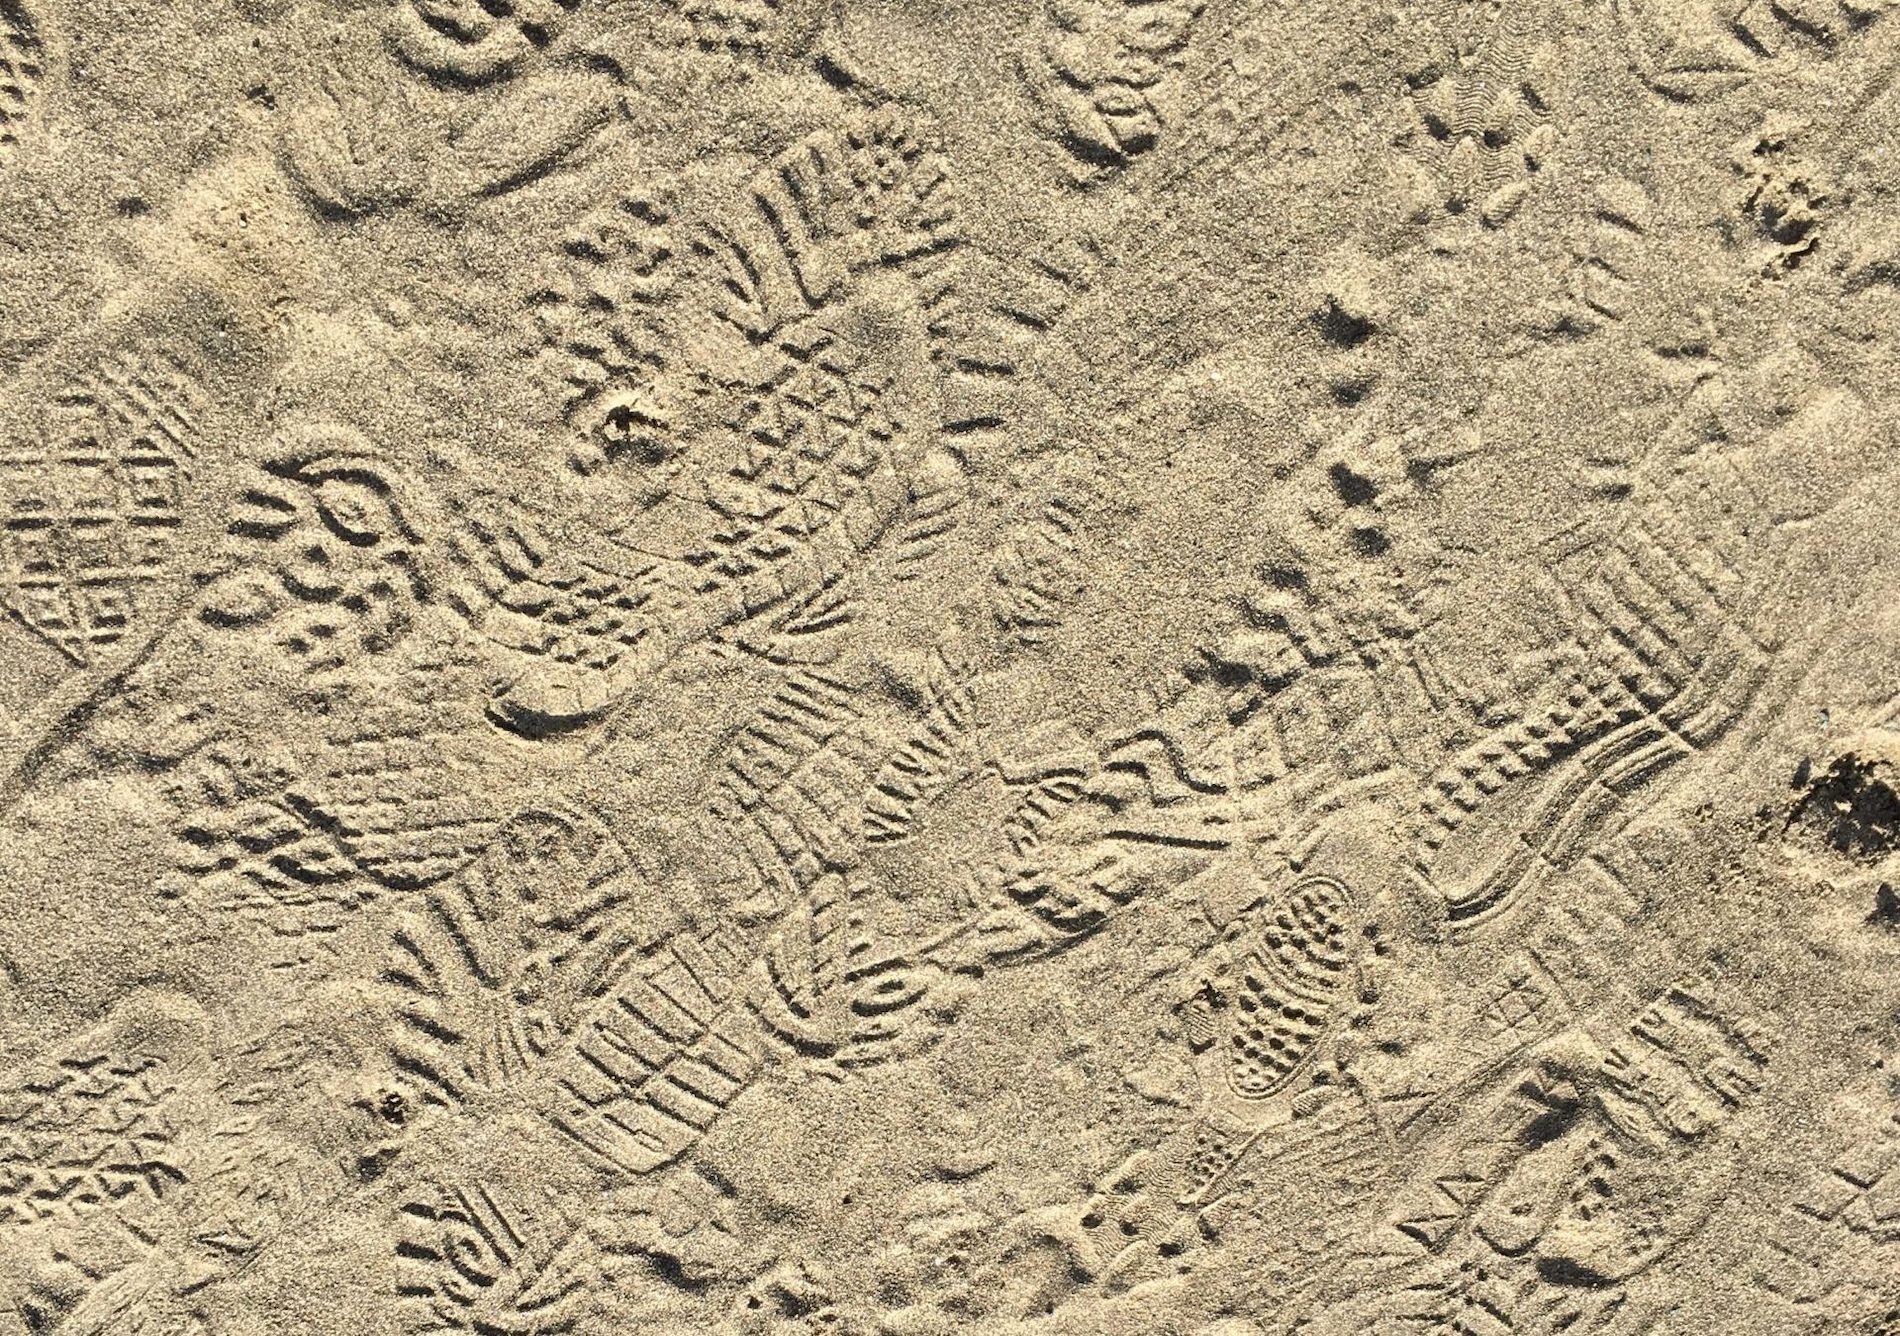 image of shoe prints in the sand